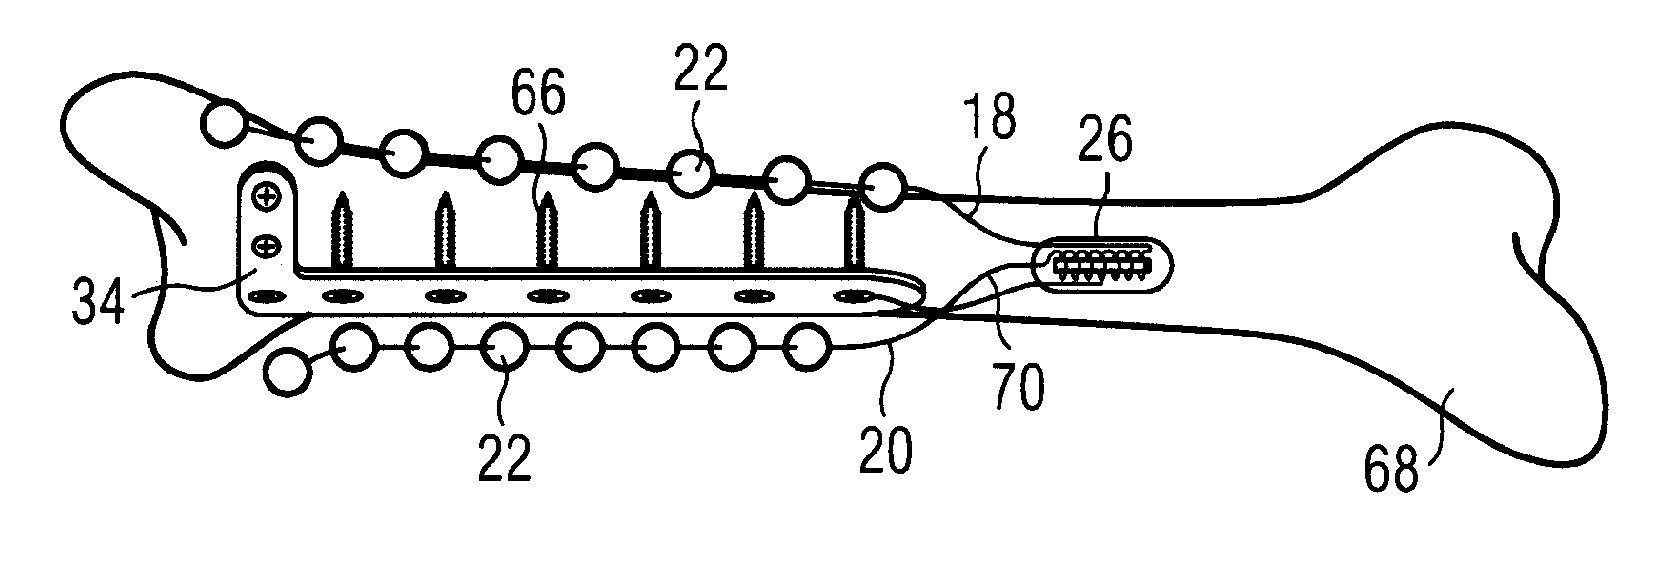 Device for Administering Drugs and for Influencing the Effects of Drugs